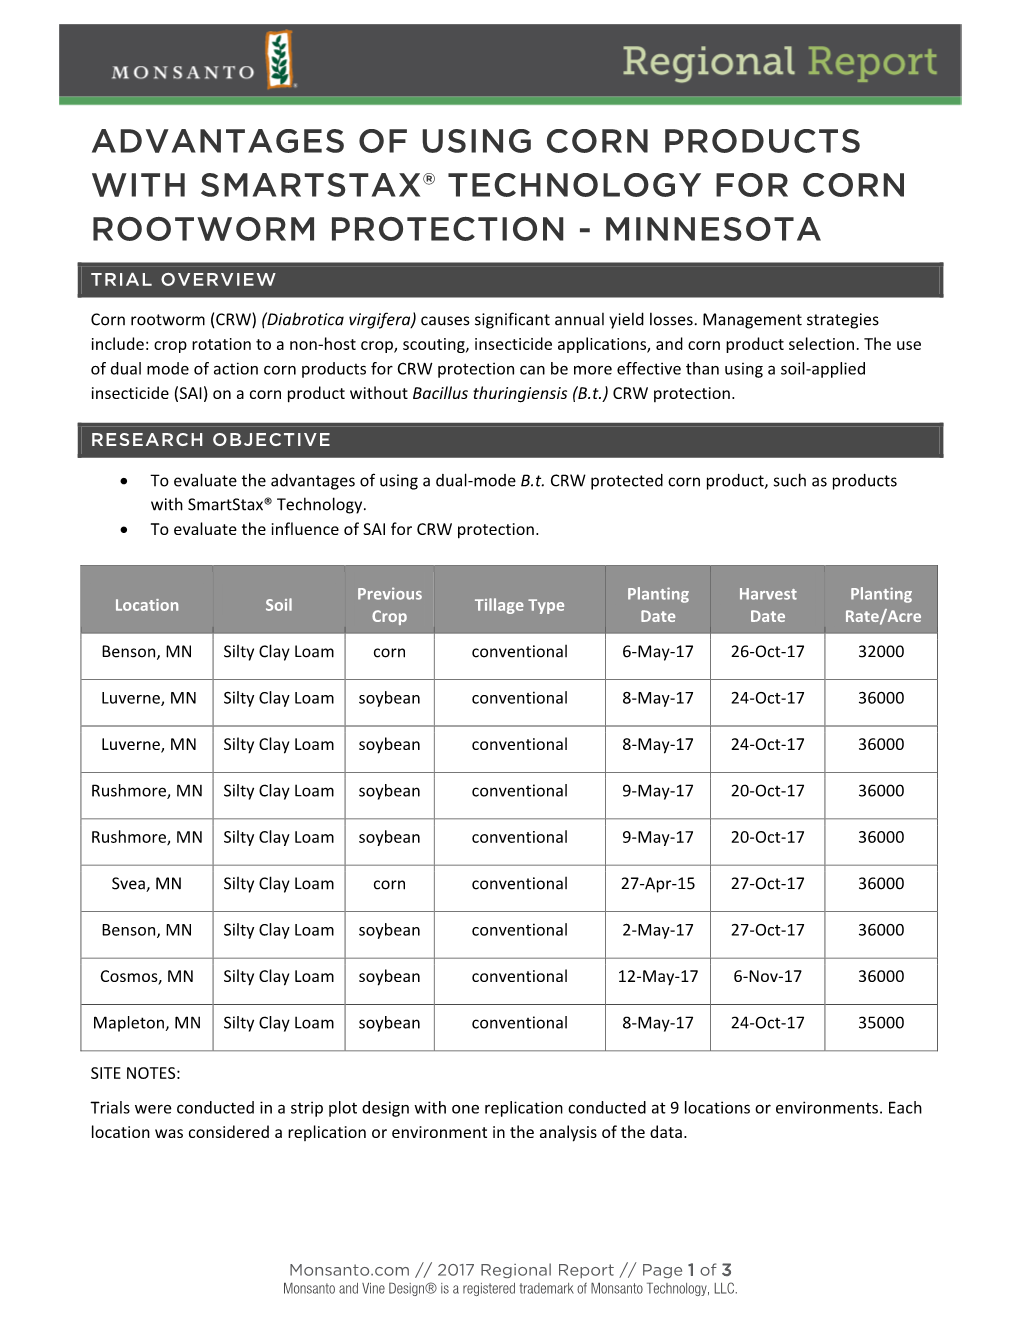 Advantages of Using Corn Products with Smartstax® Technology for Corn Rootworm Protection - Minnesota